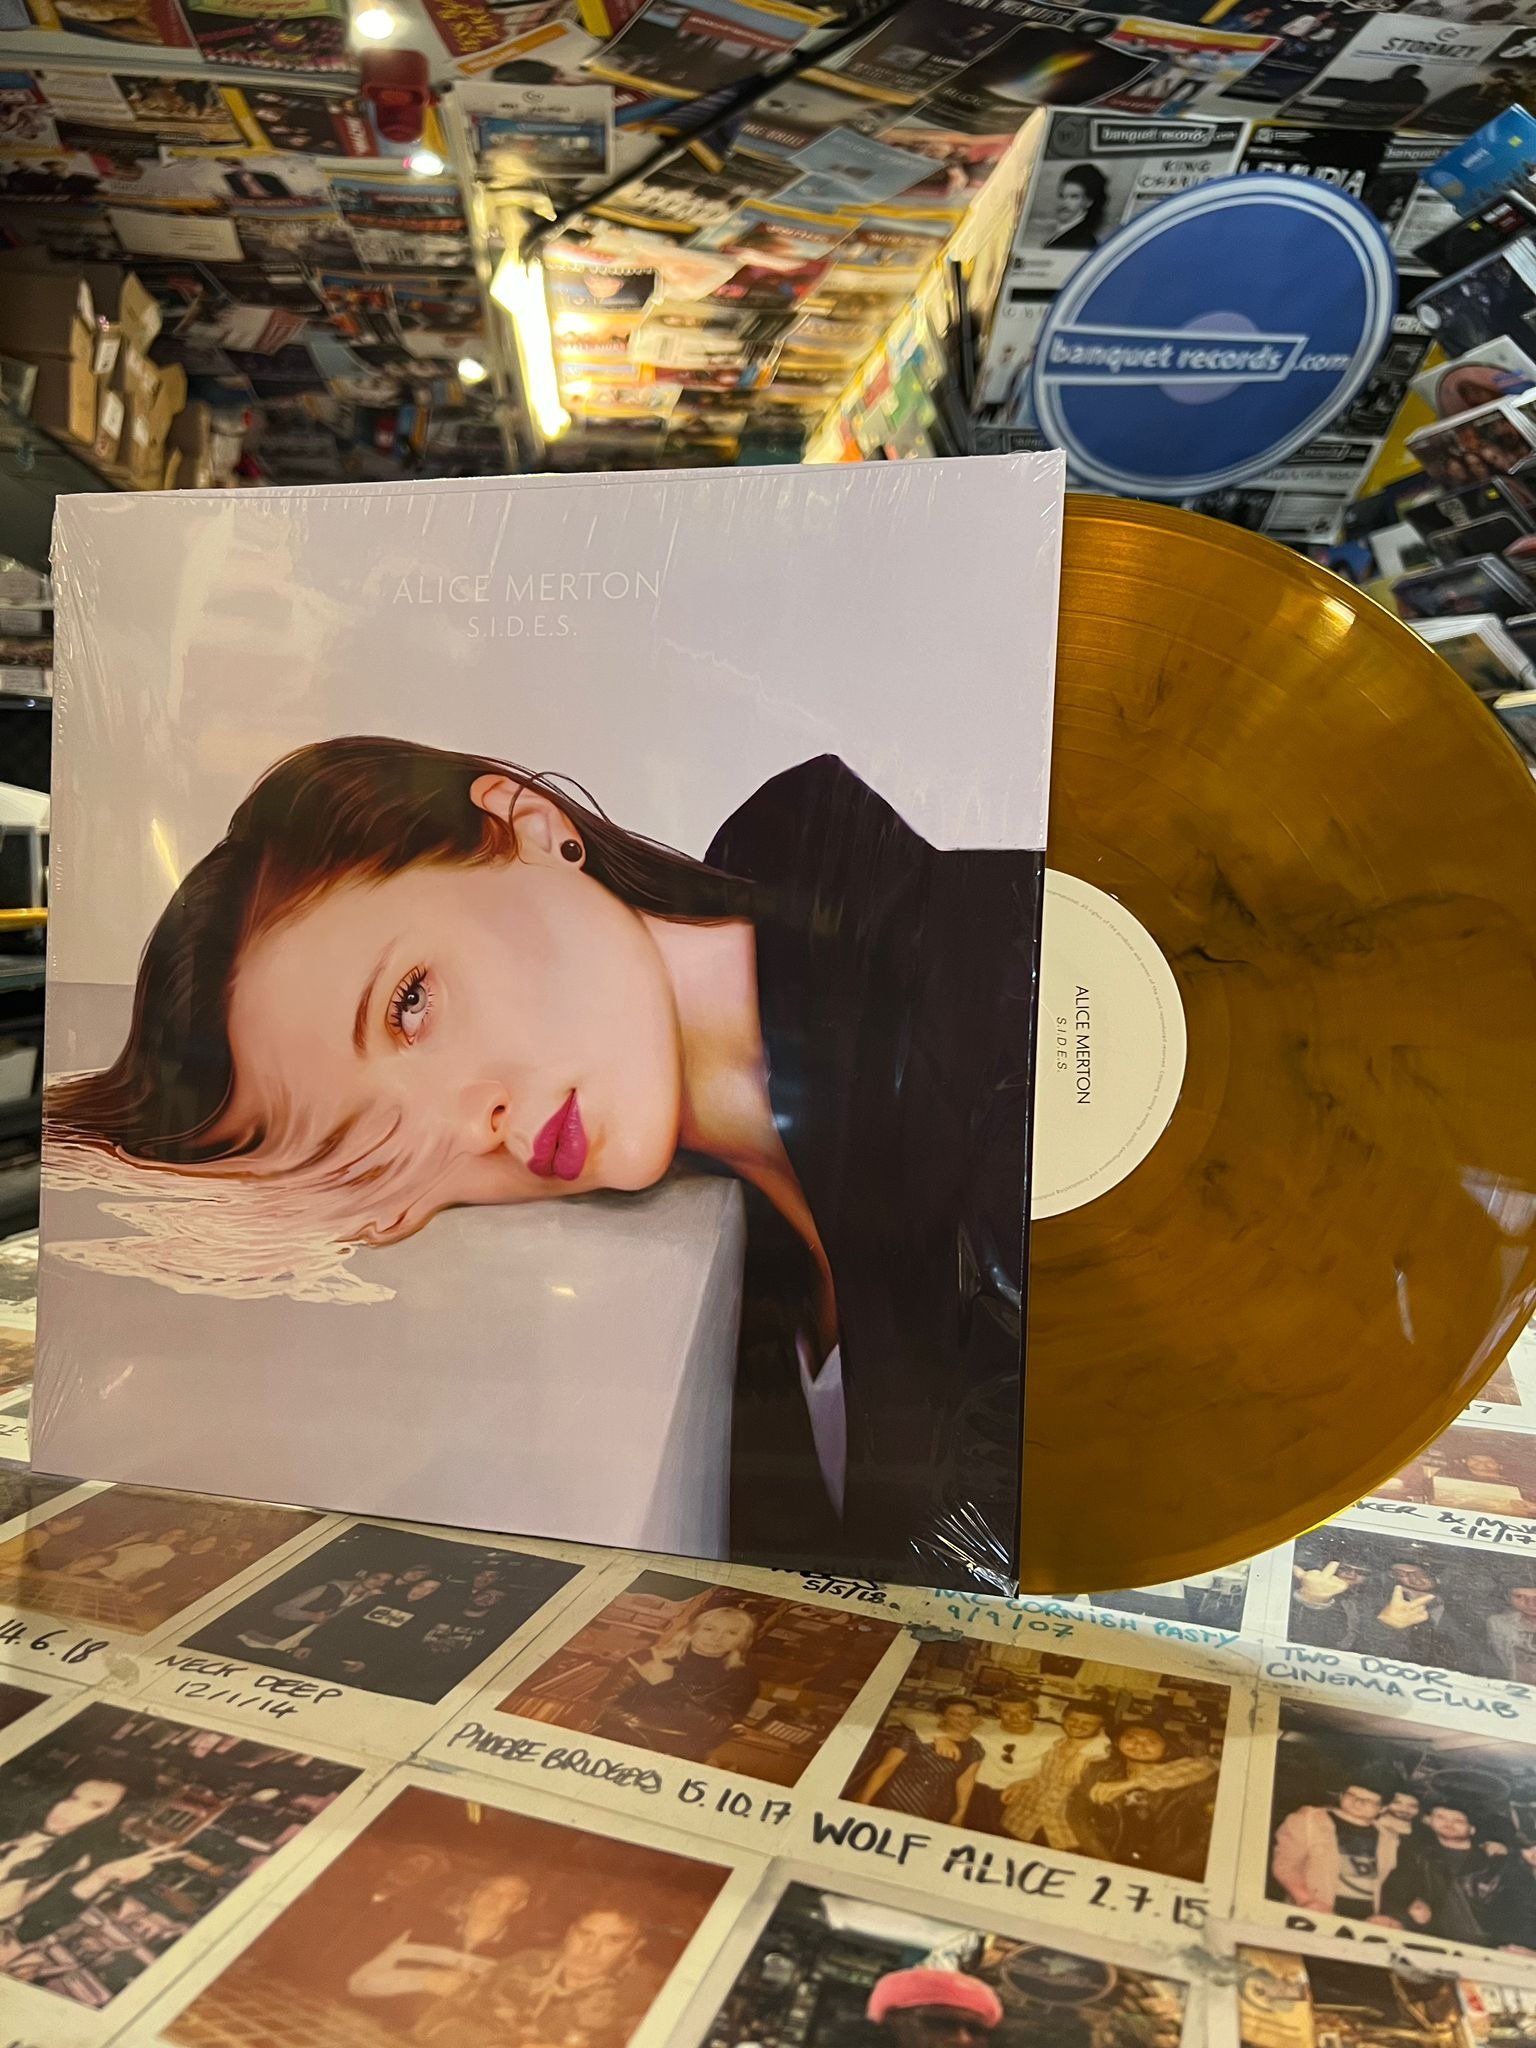 Banquet Records on "👀 ALICE MERTON - LOOK ahead of this evening's in-store, we've just got copies of the new LP S.I.D.E.S. https://t.co/6LFsYWDYLF" / Twitter